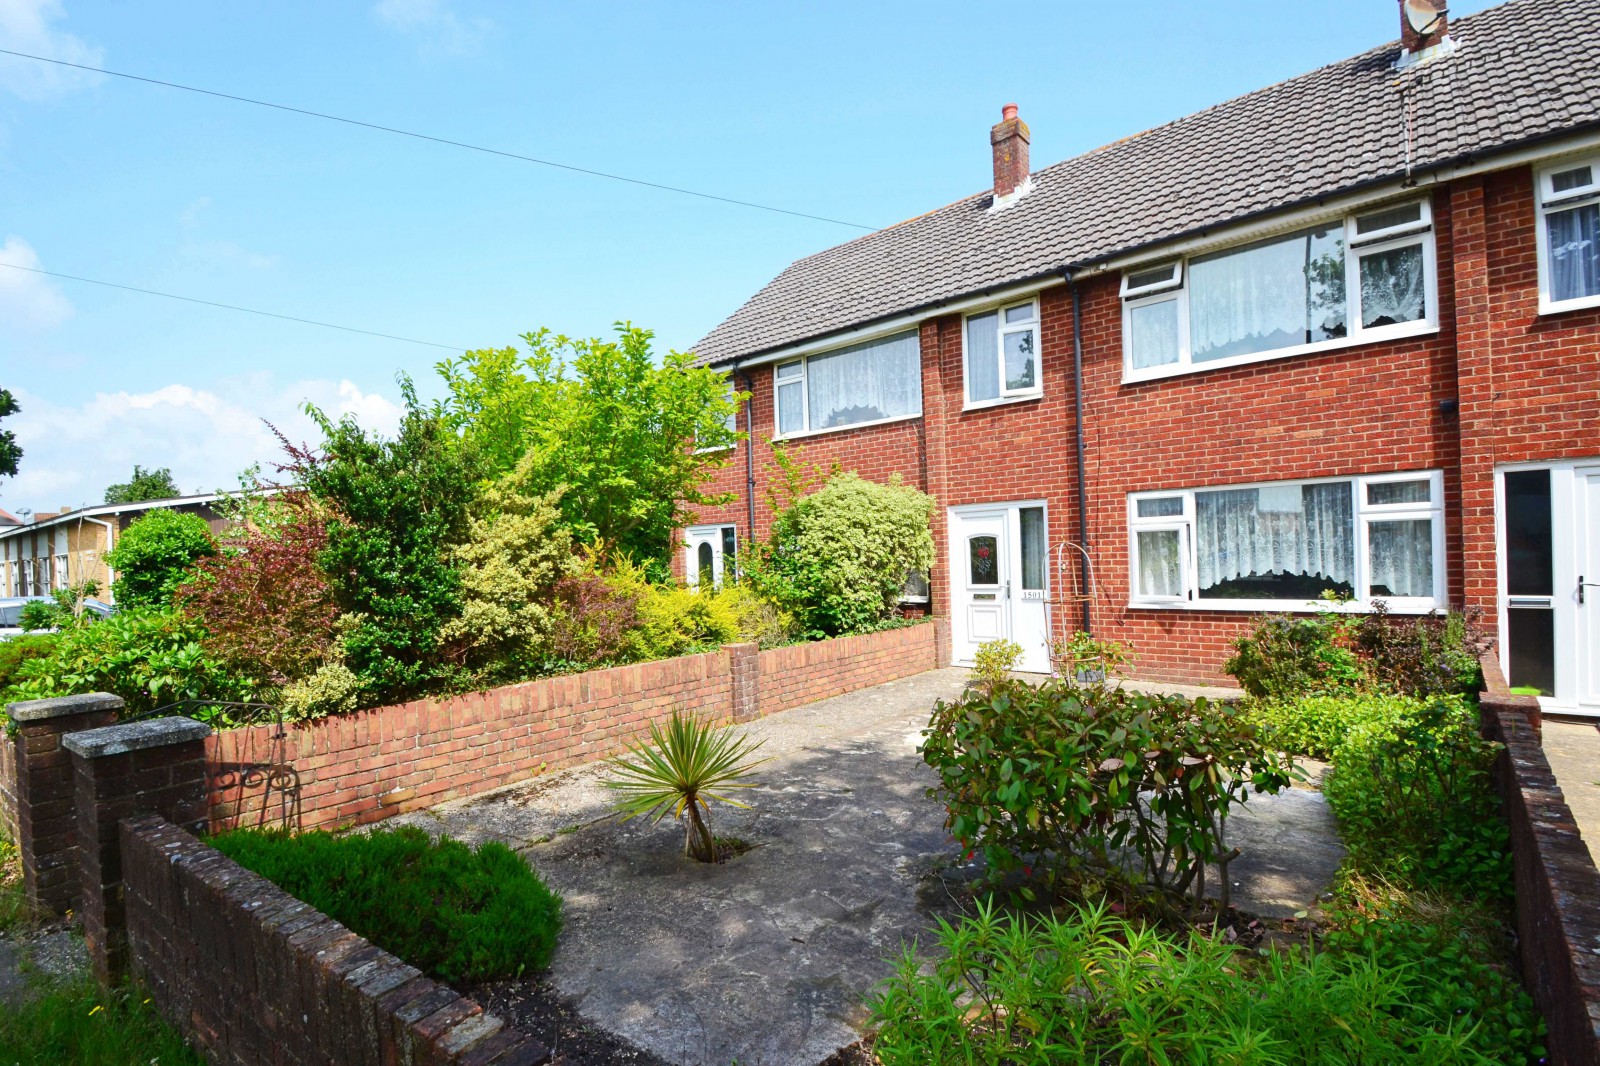 THREE BEDROOM TERRACED HOUSE IN NEED OF MODERNISATION